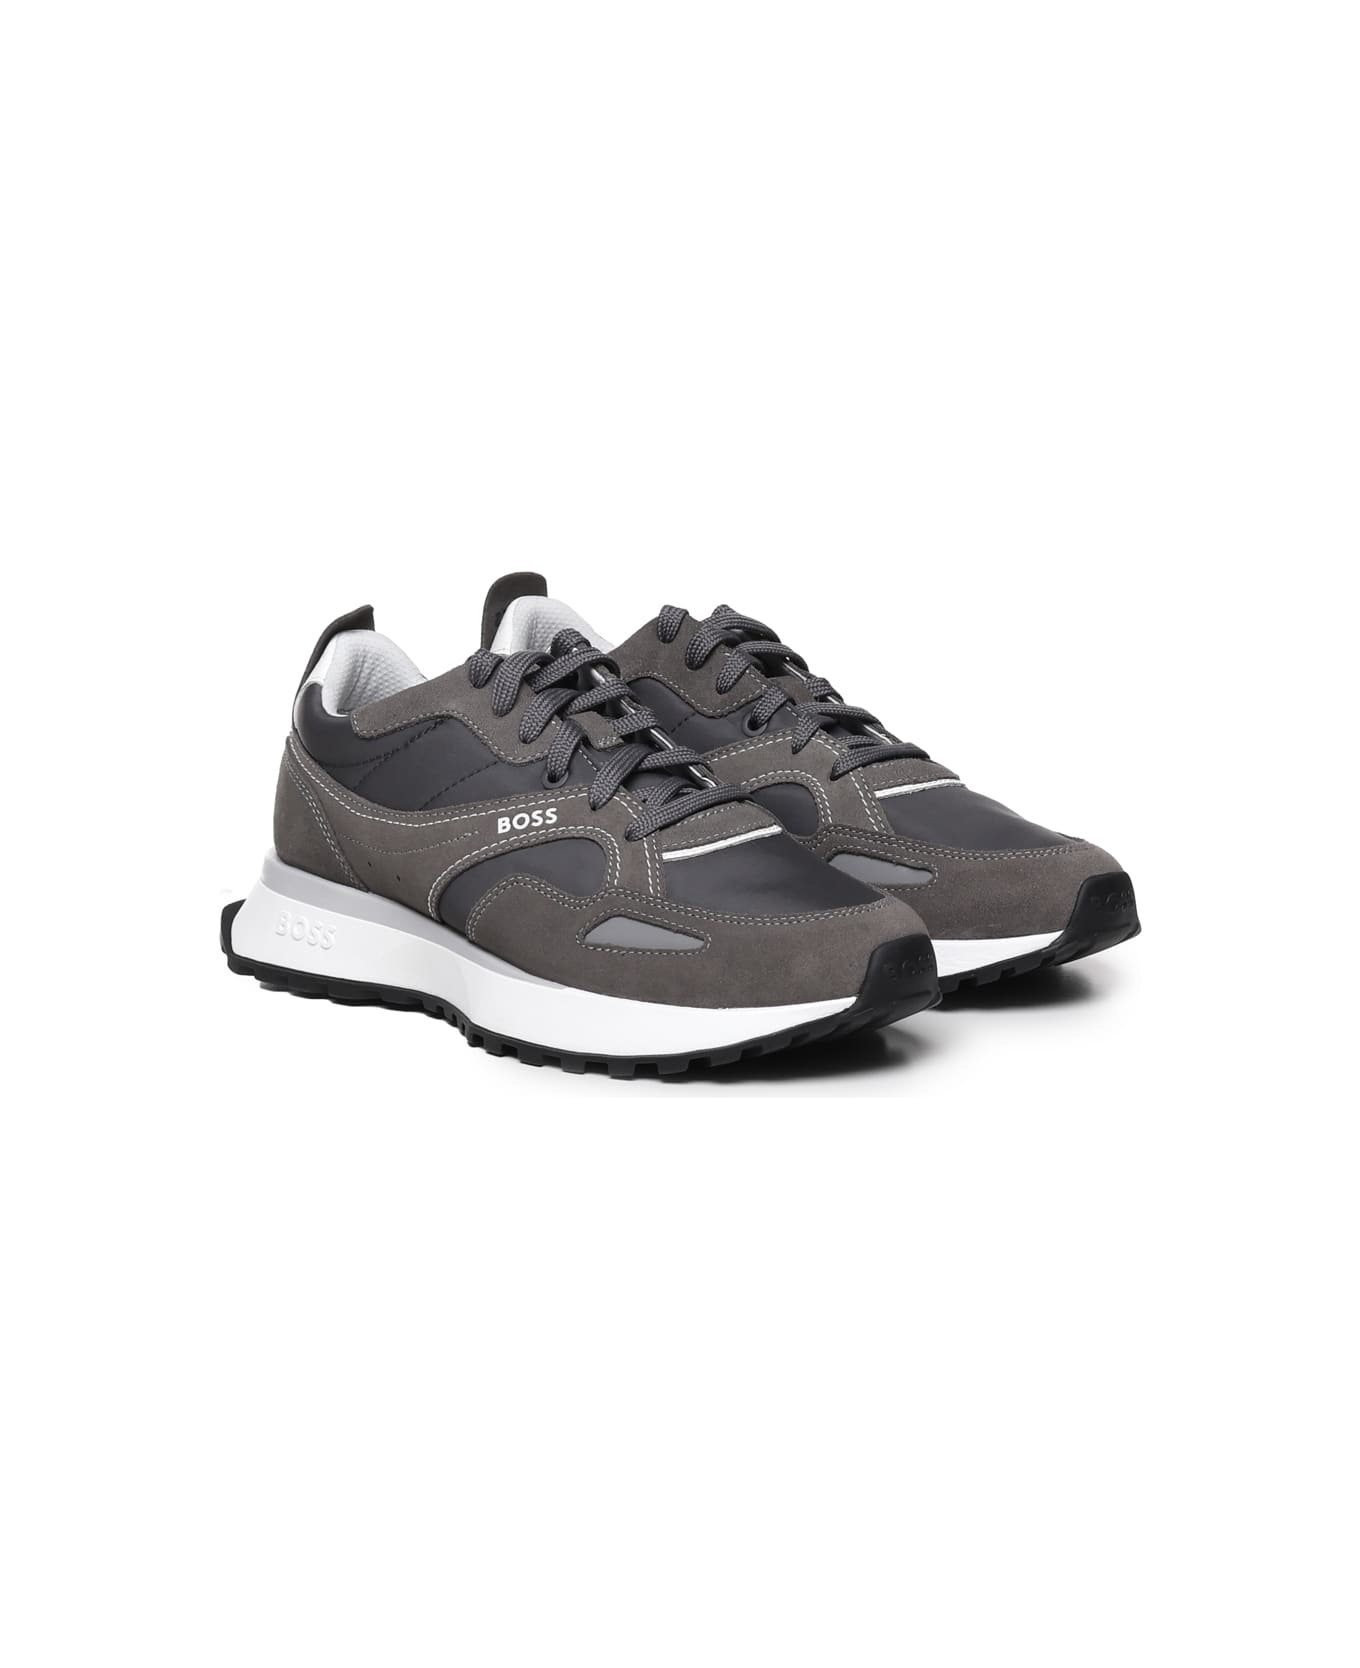 Hugo Boss Mixed Materials Sneakers With Suede And Branded Trim - Grey